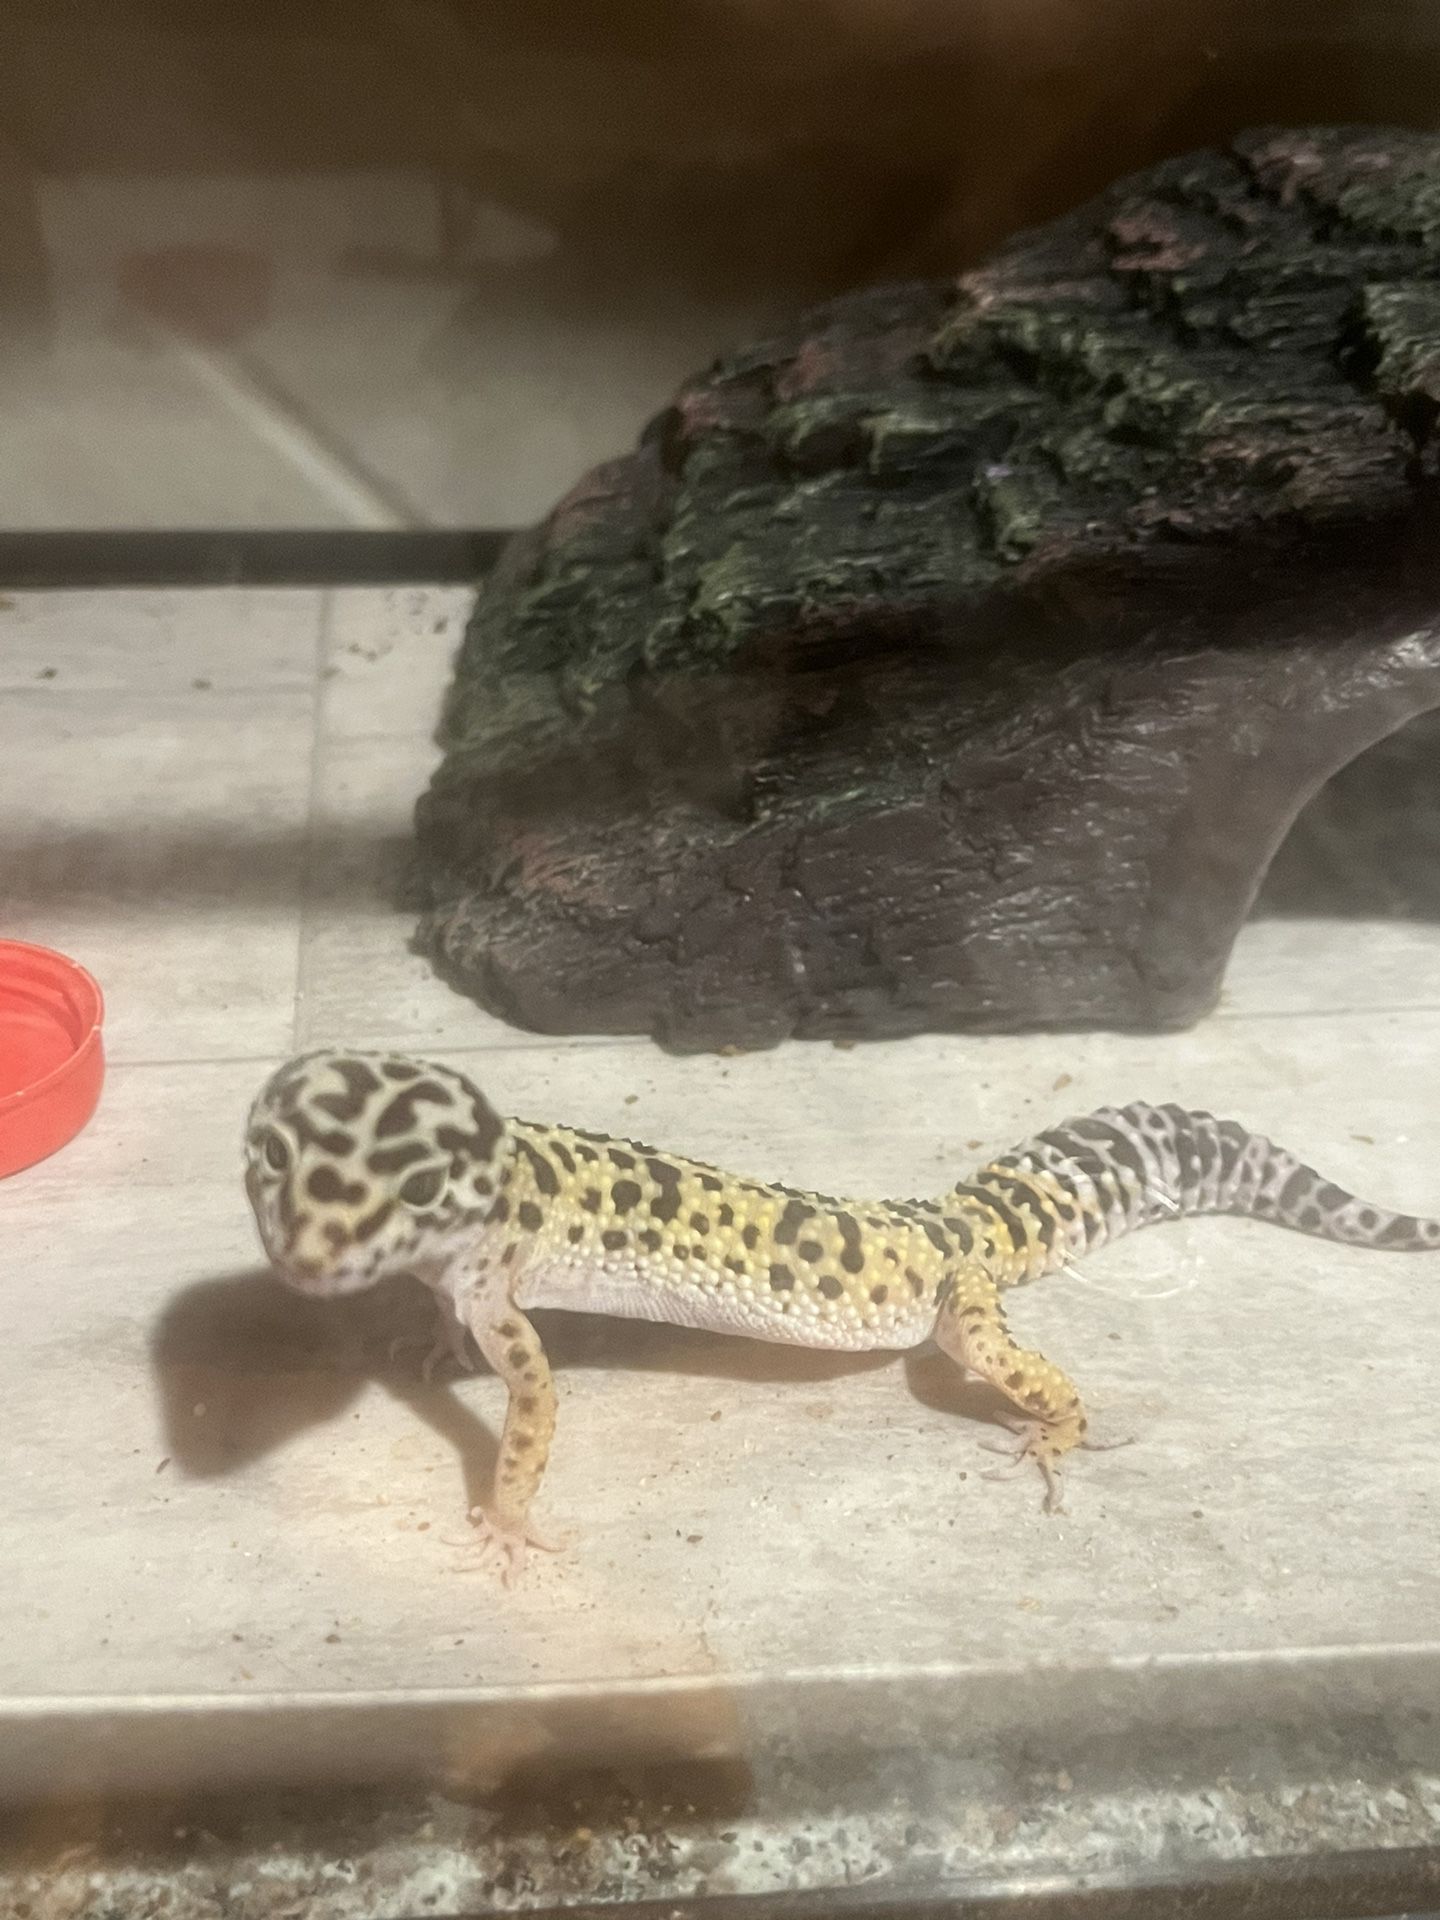 Leopard Gheko Tank Eveyrthing Inside Included Text Me For More Info 